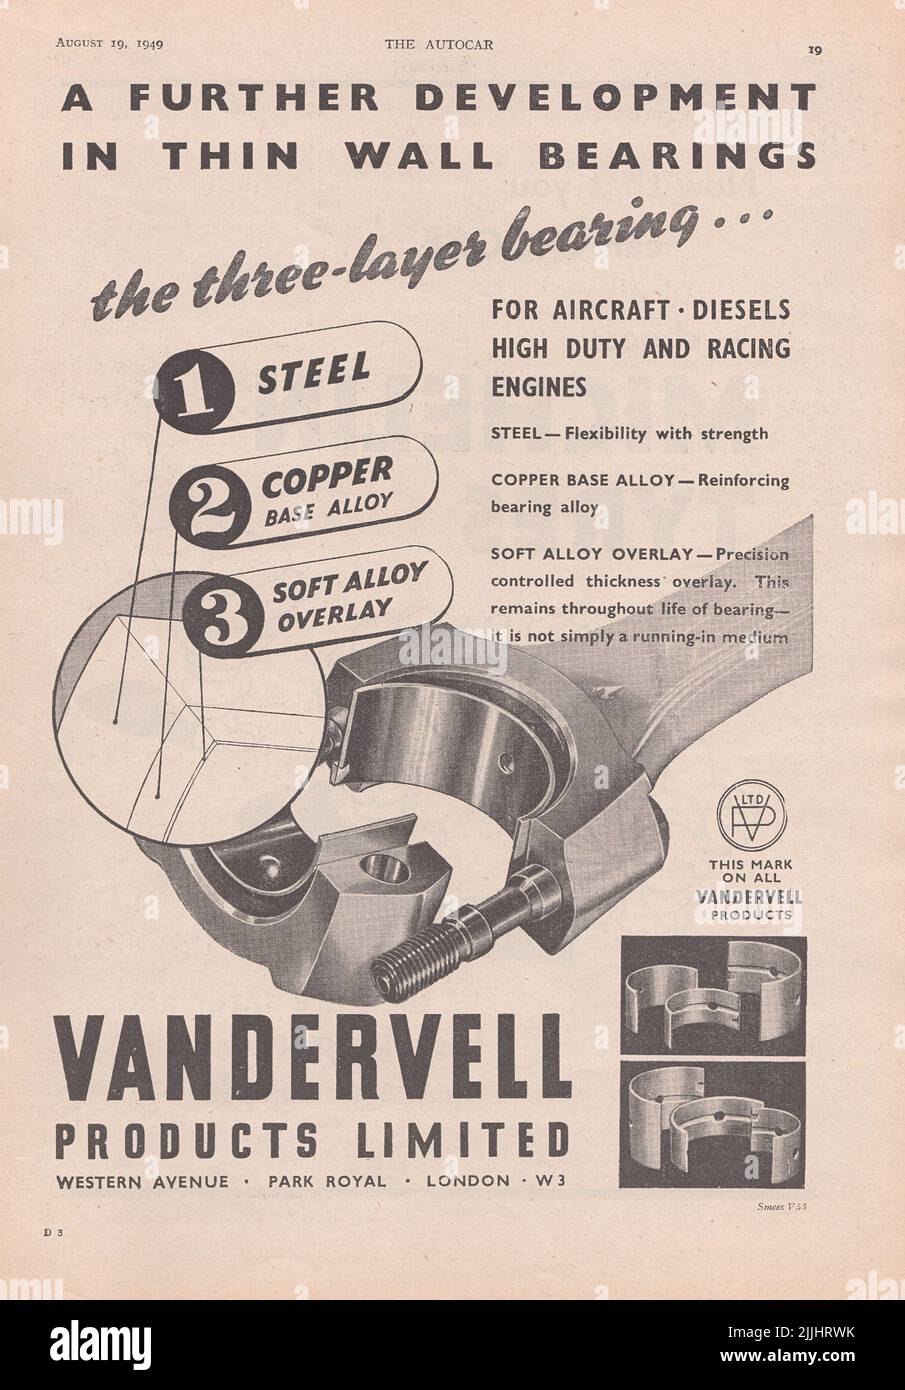 Vandervell Products Limited Vandervell Bearings Old vintage advertisement from a UK car magazine 1949 Foto Stock